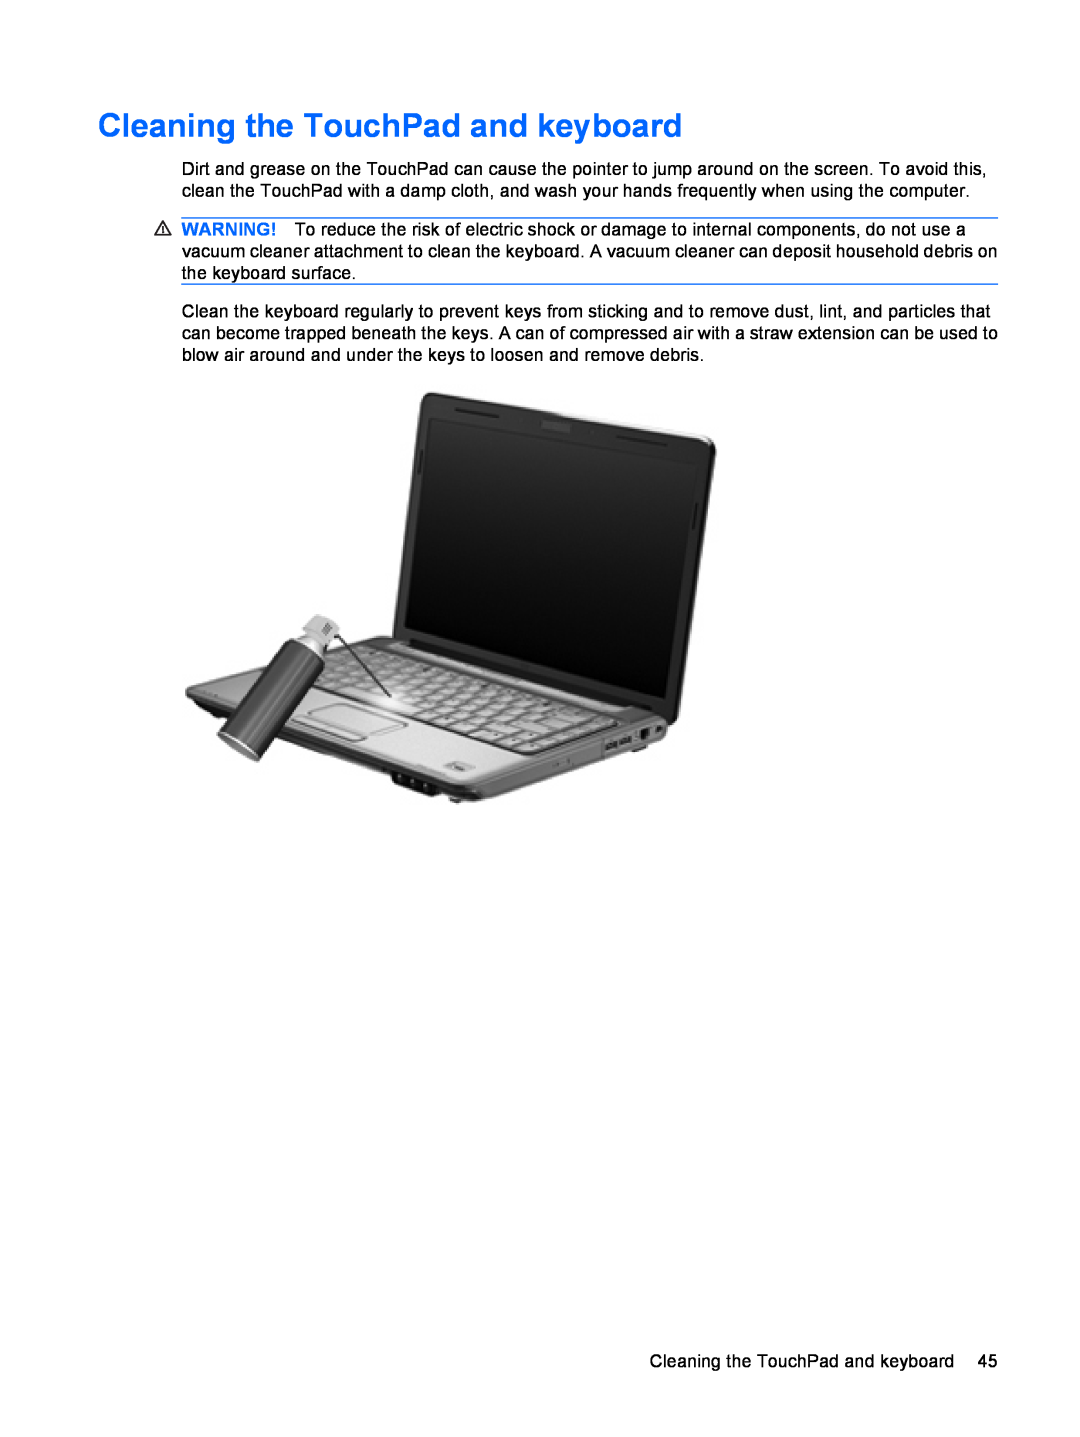 HP dv4-2160us manual Cleaning the TouchPad and keyboard 